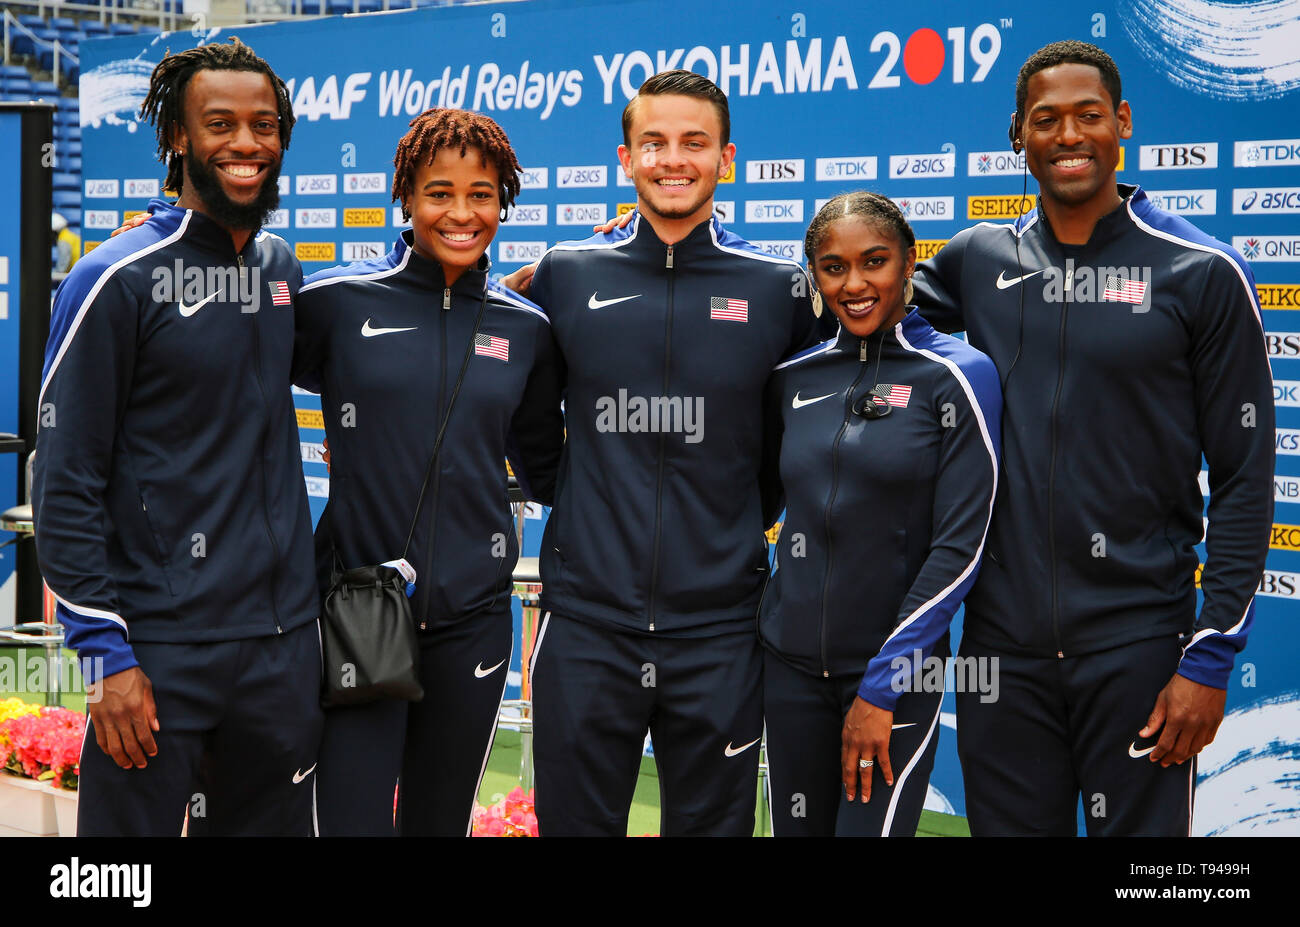 YOKOHAMA, JAPAN - MAY 10: USA’s shuttle hurdles relay team (Devon Allen, Christina Clemons, Freddie Crittenden, Ryan Fontenot, Queen Harrison, Sharika Nelvis) during the official press conference of the 2019 IAAF World Relay Championships at the Nissan Stadium on May 10, 2019 in Yokohama, Japan. (Photo by Roger Sedres for the IAAF) Stock Photo